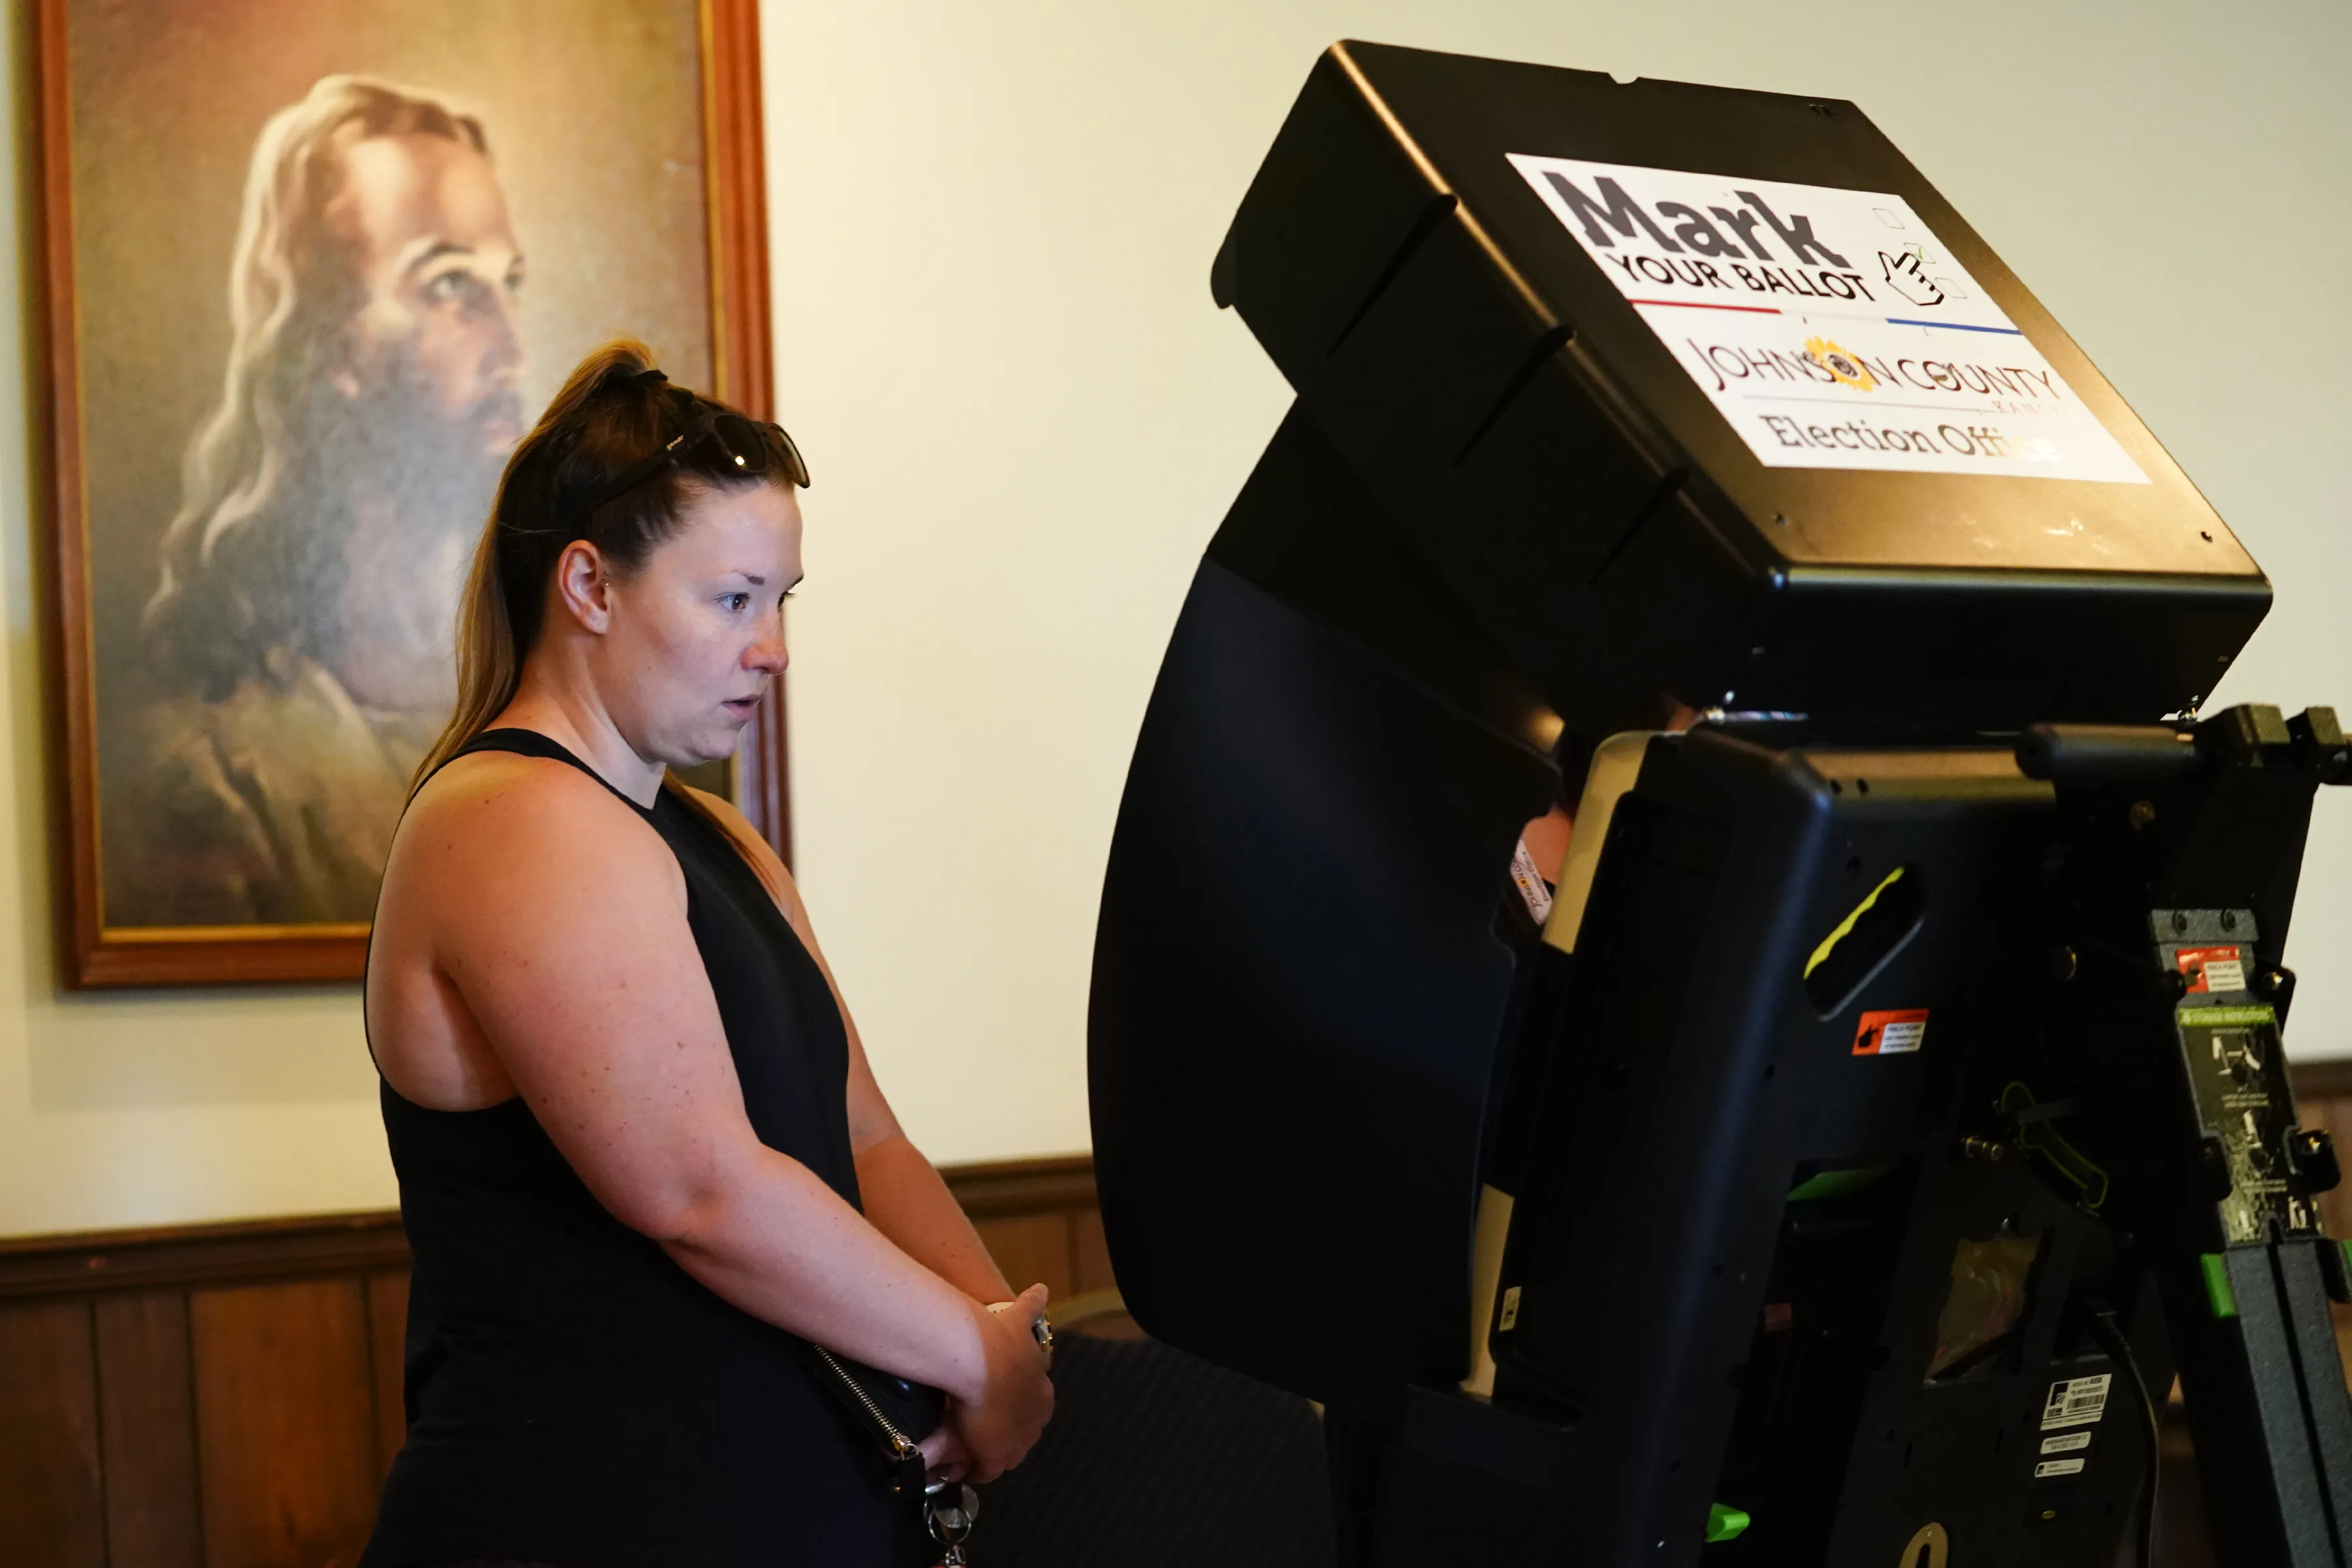 A poll worker helps a voter cast their ballot in the Kansas Primary Election at Merriam Christian Church on Aug. 2, 2022, in Merriam, Kansas. Voters in Kansas were set to decide whether or not the state constitution should include a right to an abortion.?w=200&h=150